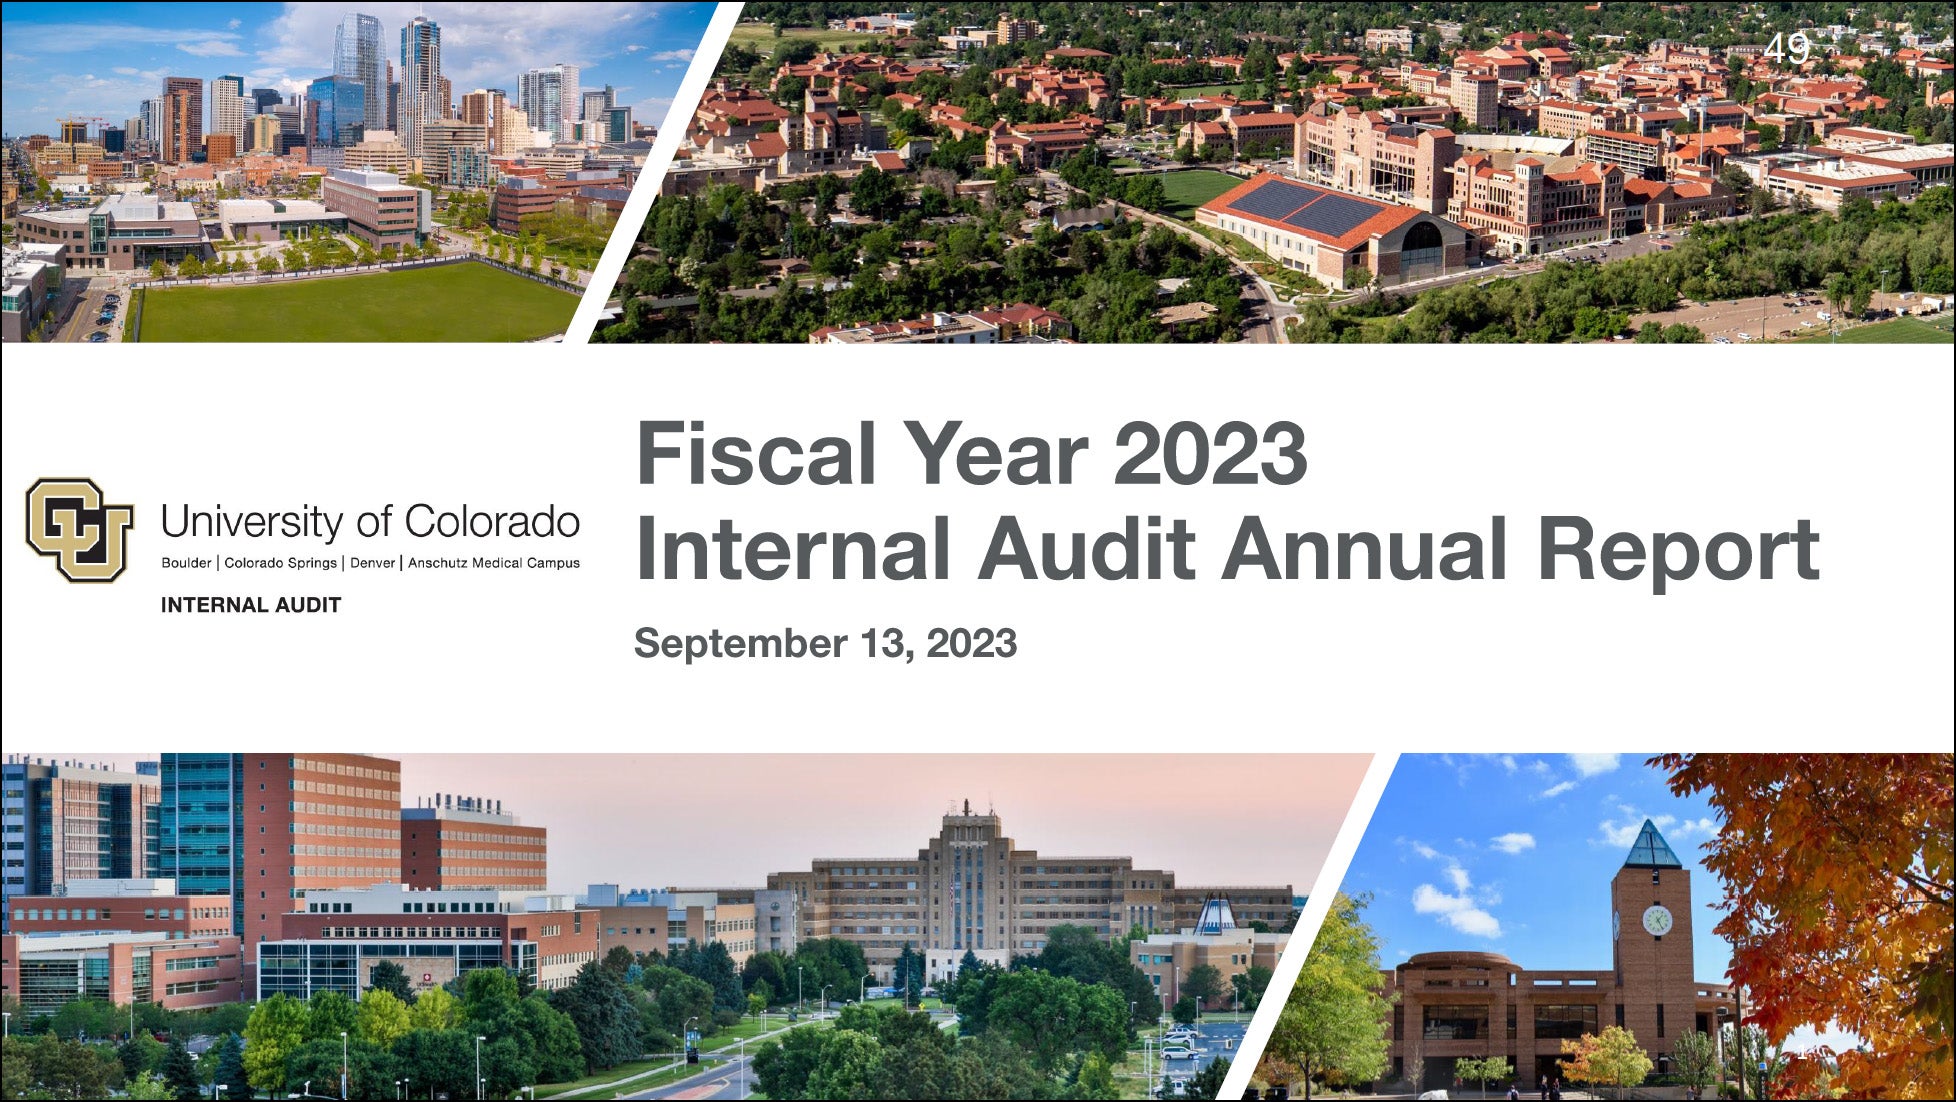 Download the 2023 Internal Audit Annual Report